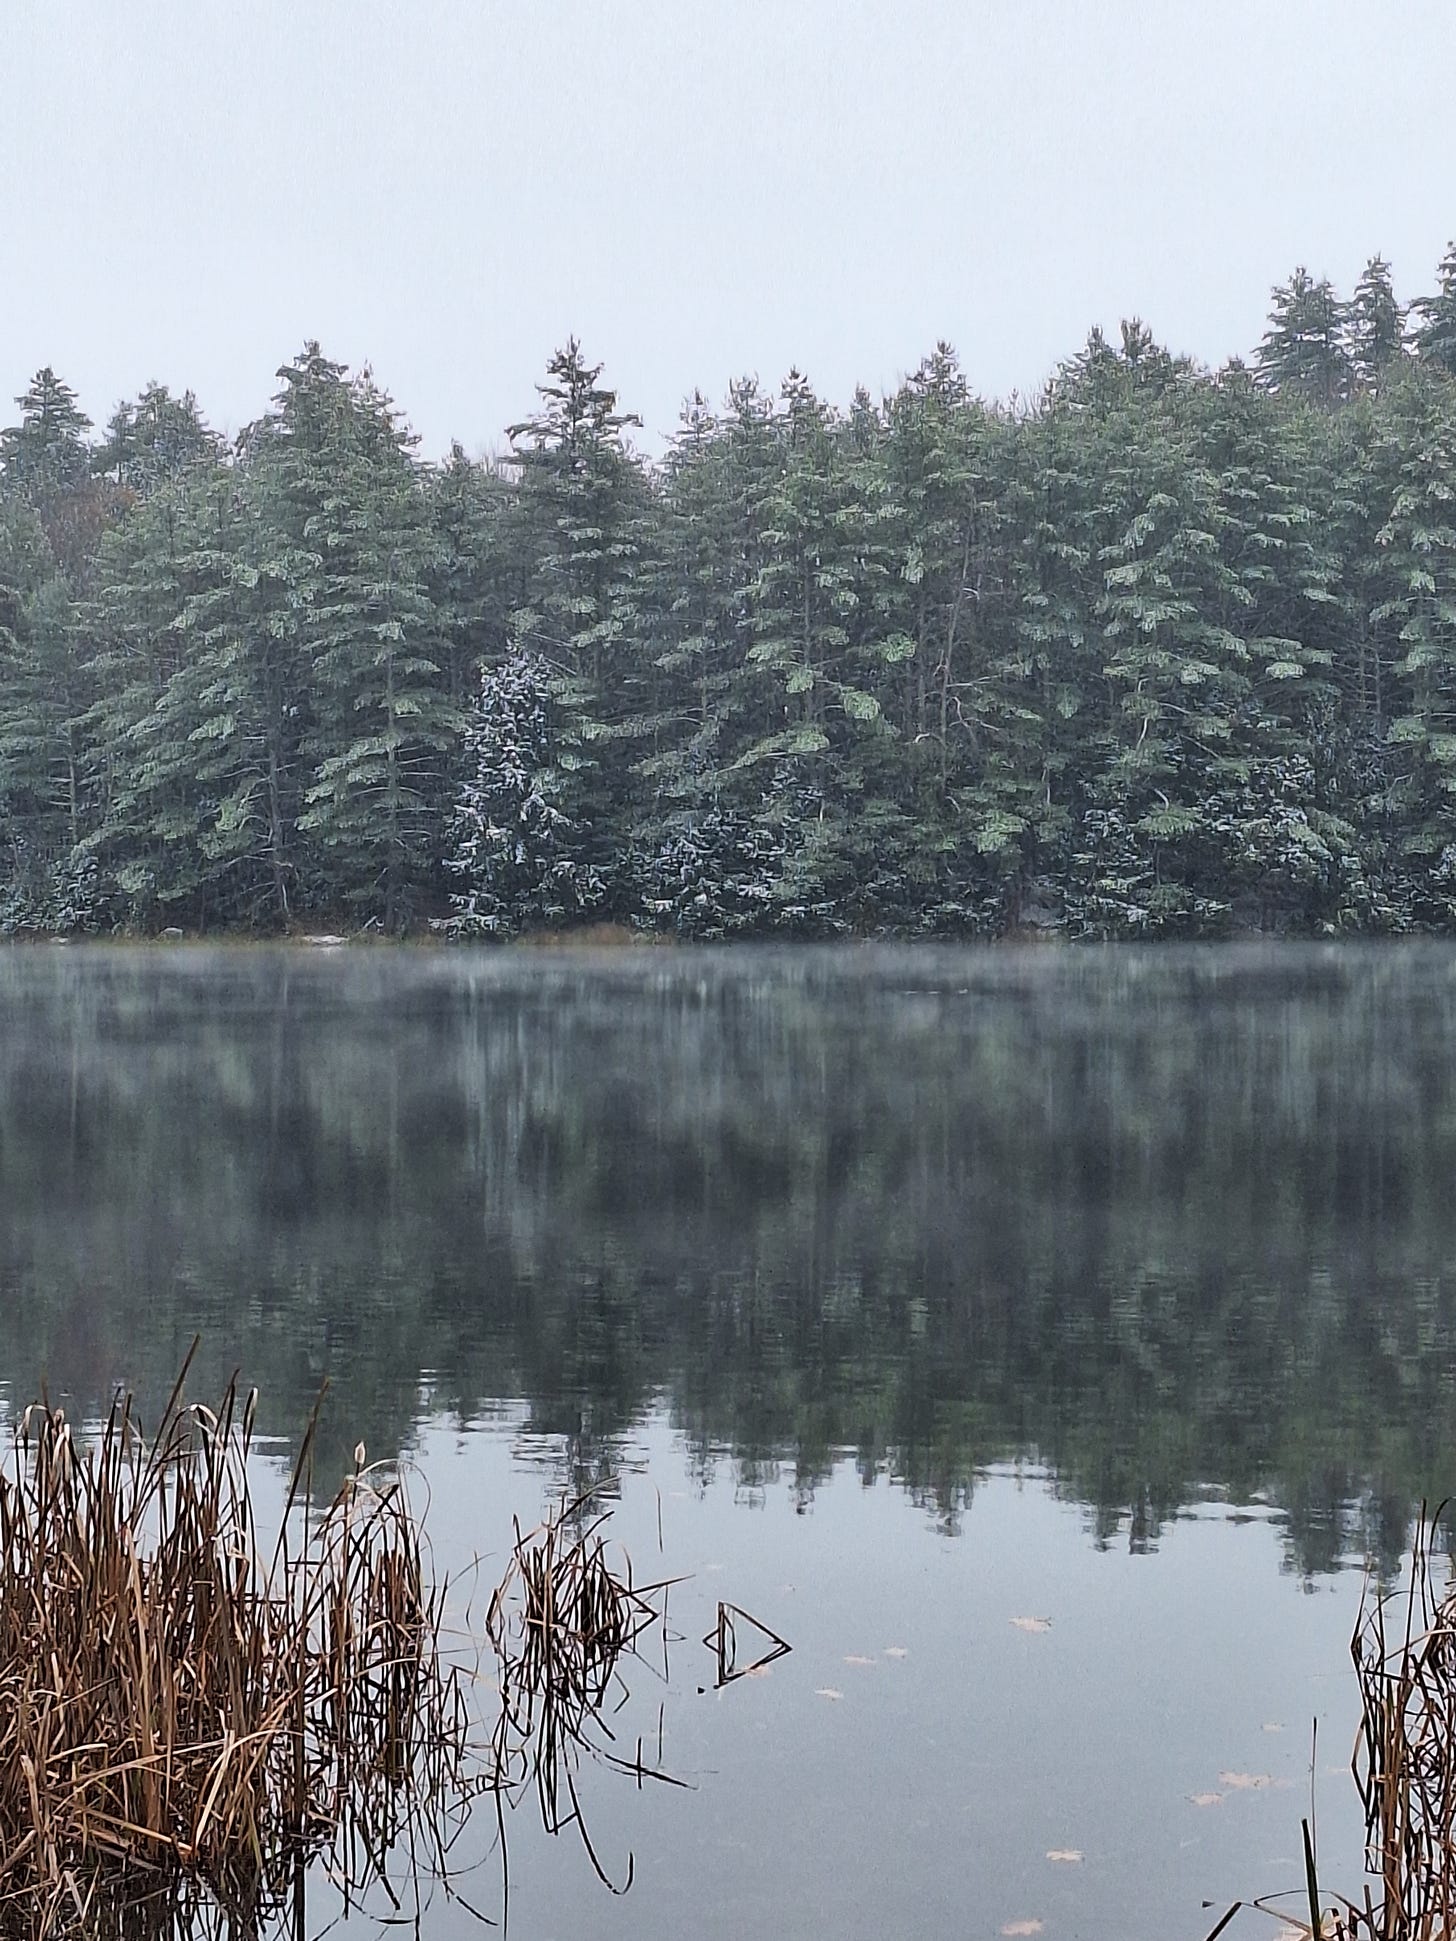 a picture of pine trees with a bit of snow on them from across a small pond